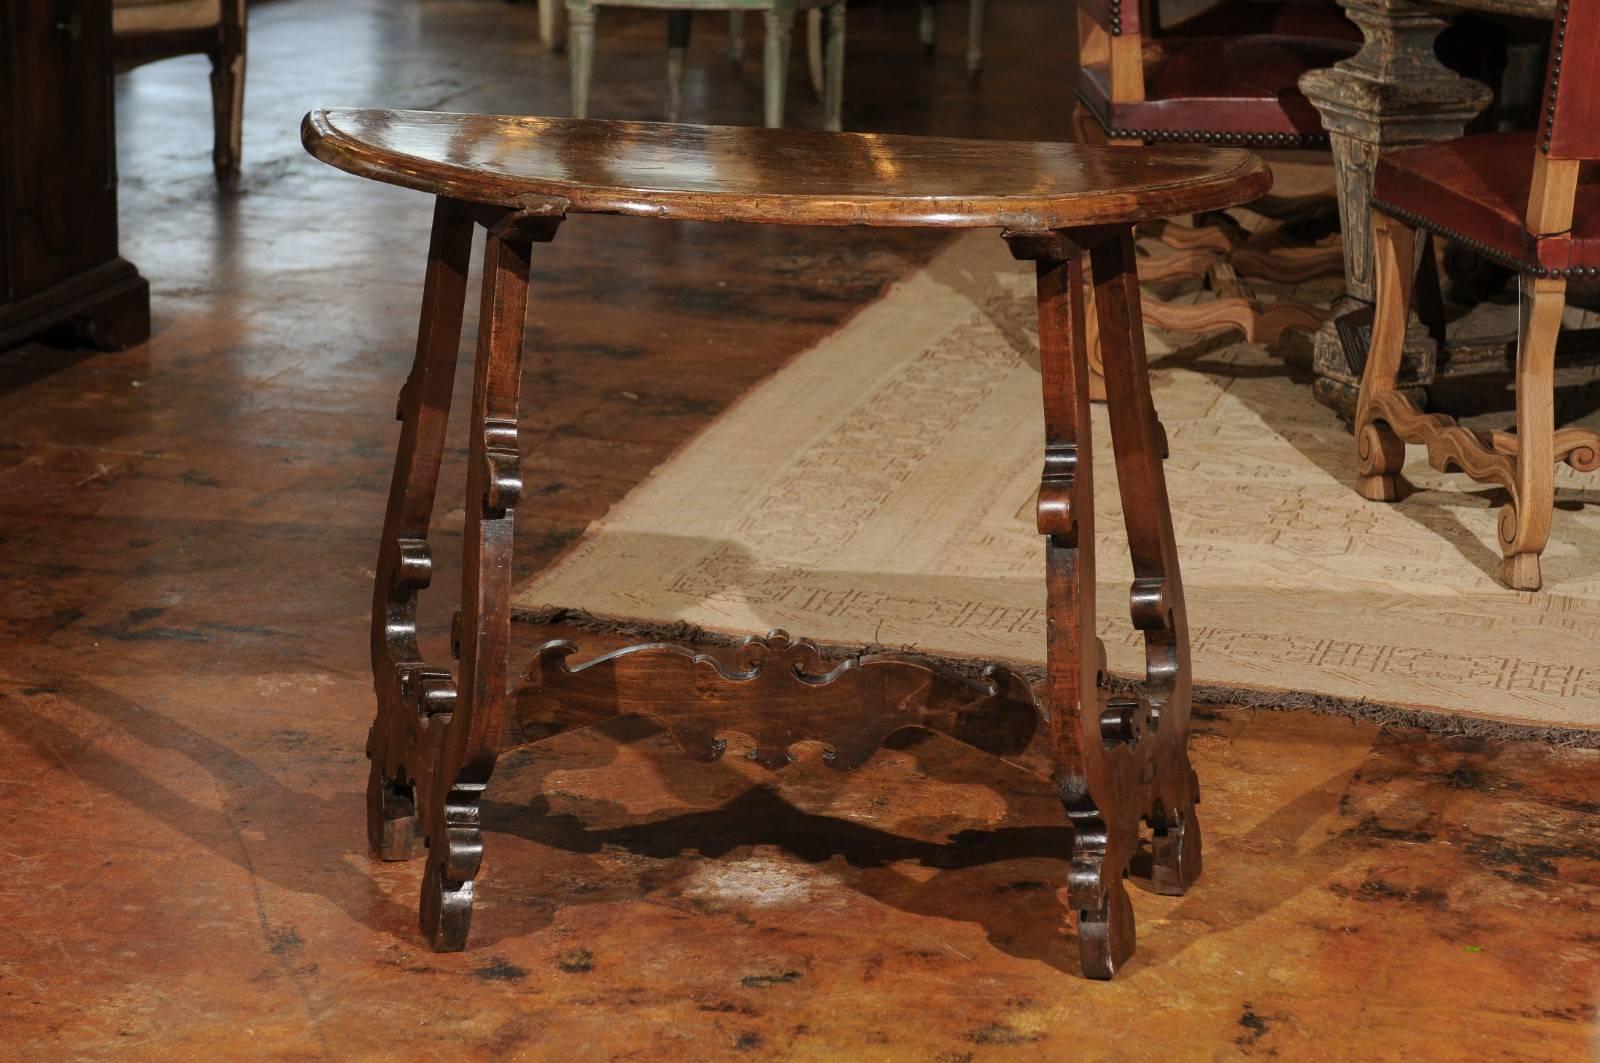 An Italian Baroque Revival carved walnut demilune console table from Florence with lyre-shaped legs and cross stretcher from the late 19th century. Born in Tuscany during the 1880s, this demilune table feature a semi-circular top with rounded edges,